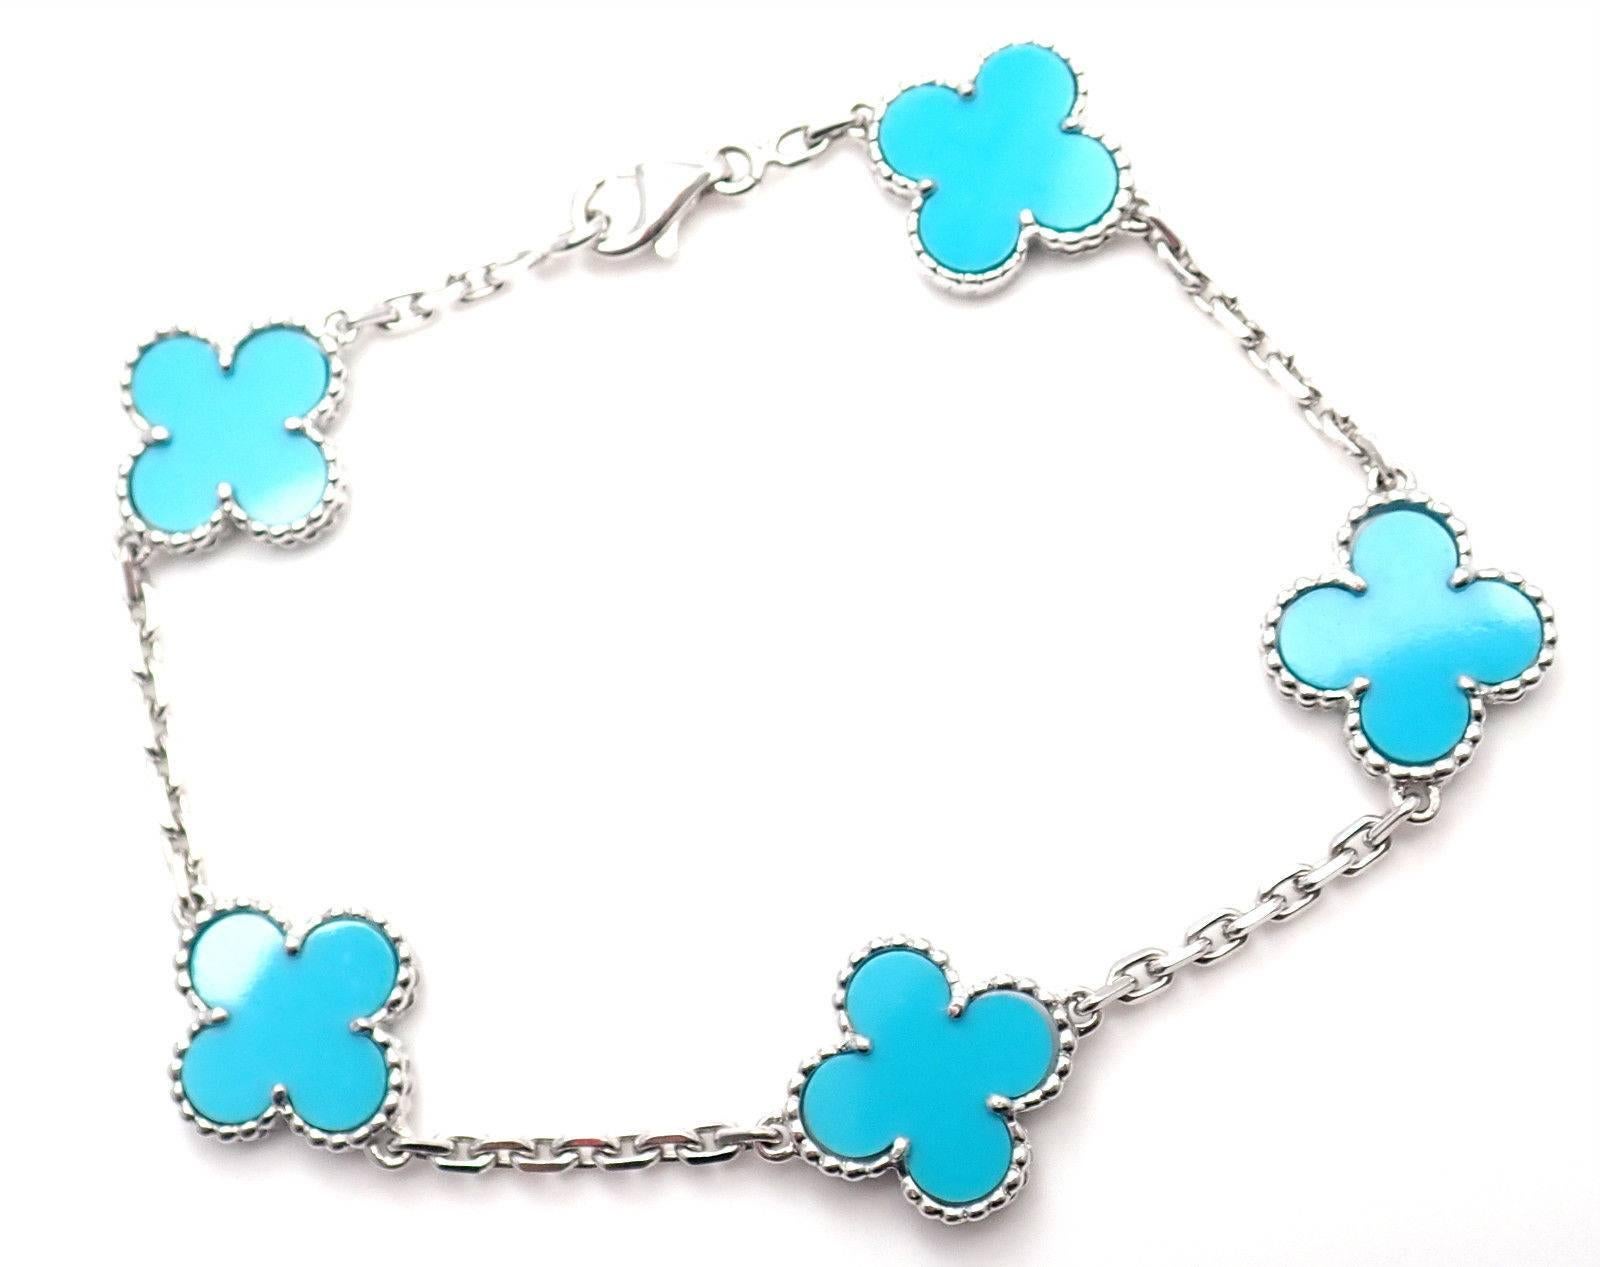 18k White Gold Vintage Turquoise Alhambra Bracelet from Van Cleef & Arpels.  
With 5 alhambra shape turquoise stones. 
Details:  
Length: 7 1/4'' 
Weight: 11.4 grams
Stamped Hallmarks: V.C.A. 750 BF5792 French Hallmarks
*Free Shipping within the